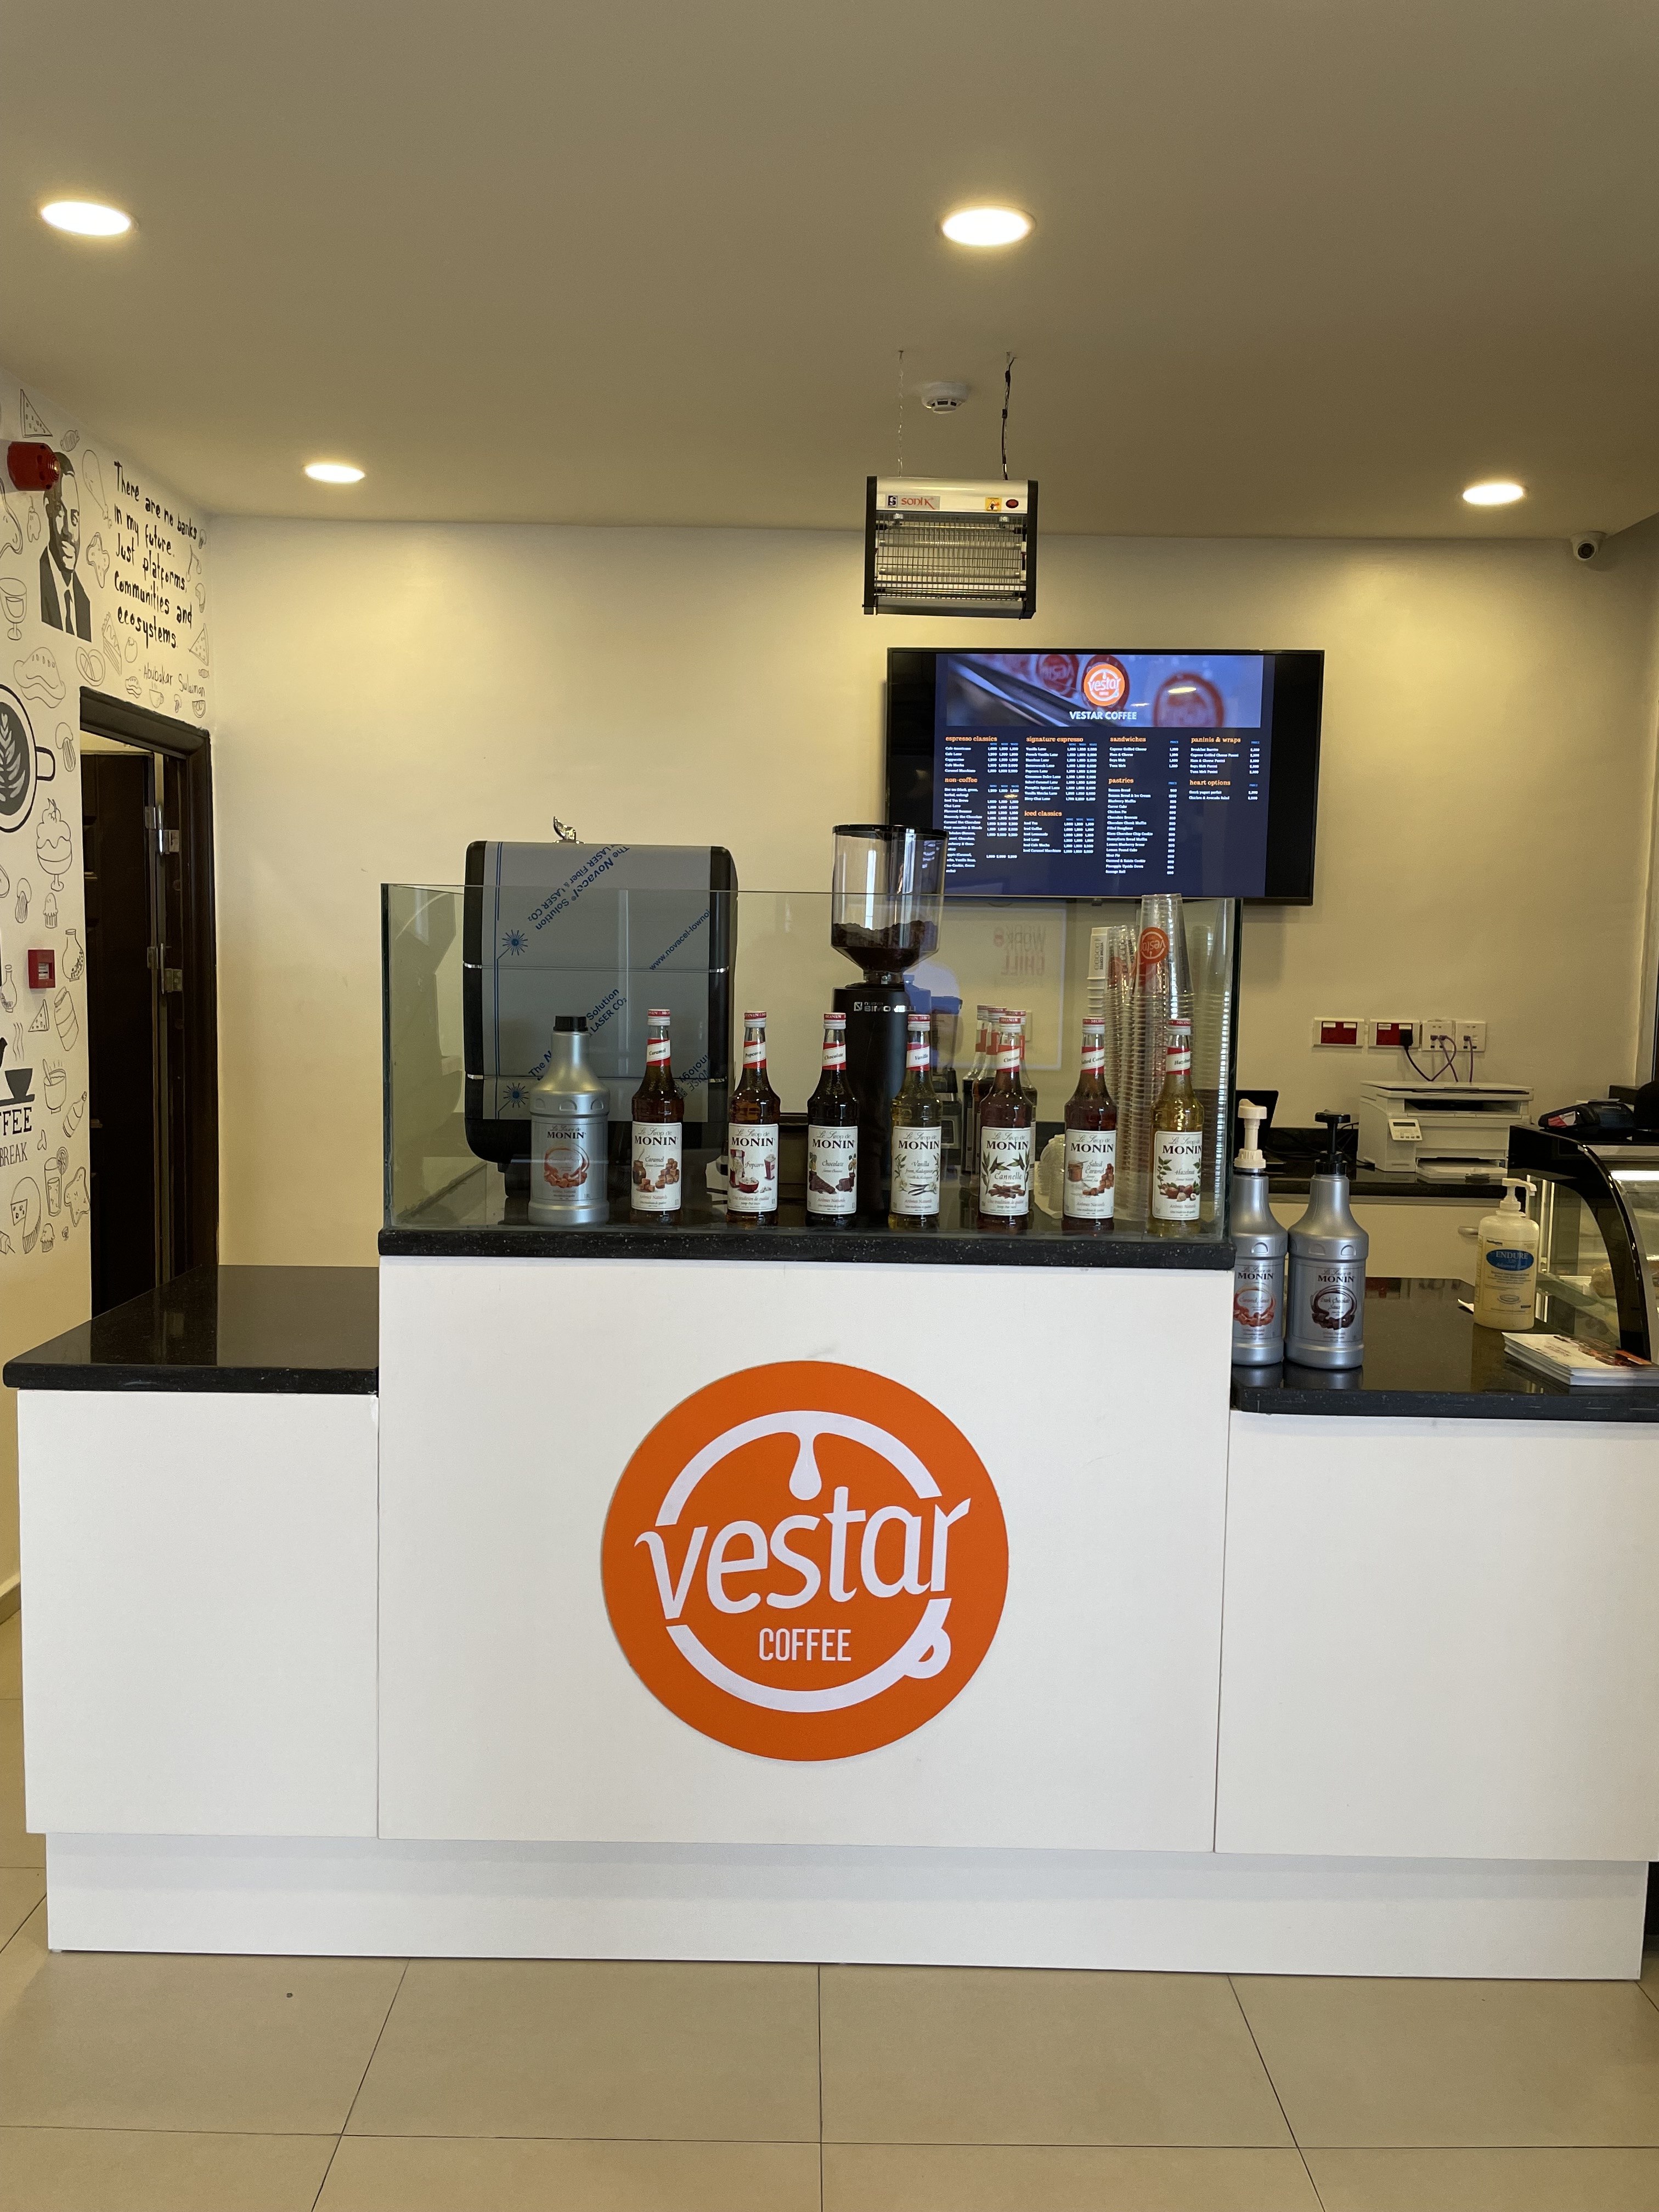 Vestar Coffee stand at Cafe One Co-working space in lekki lagos